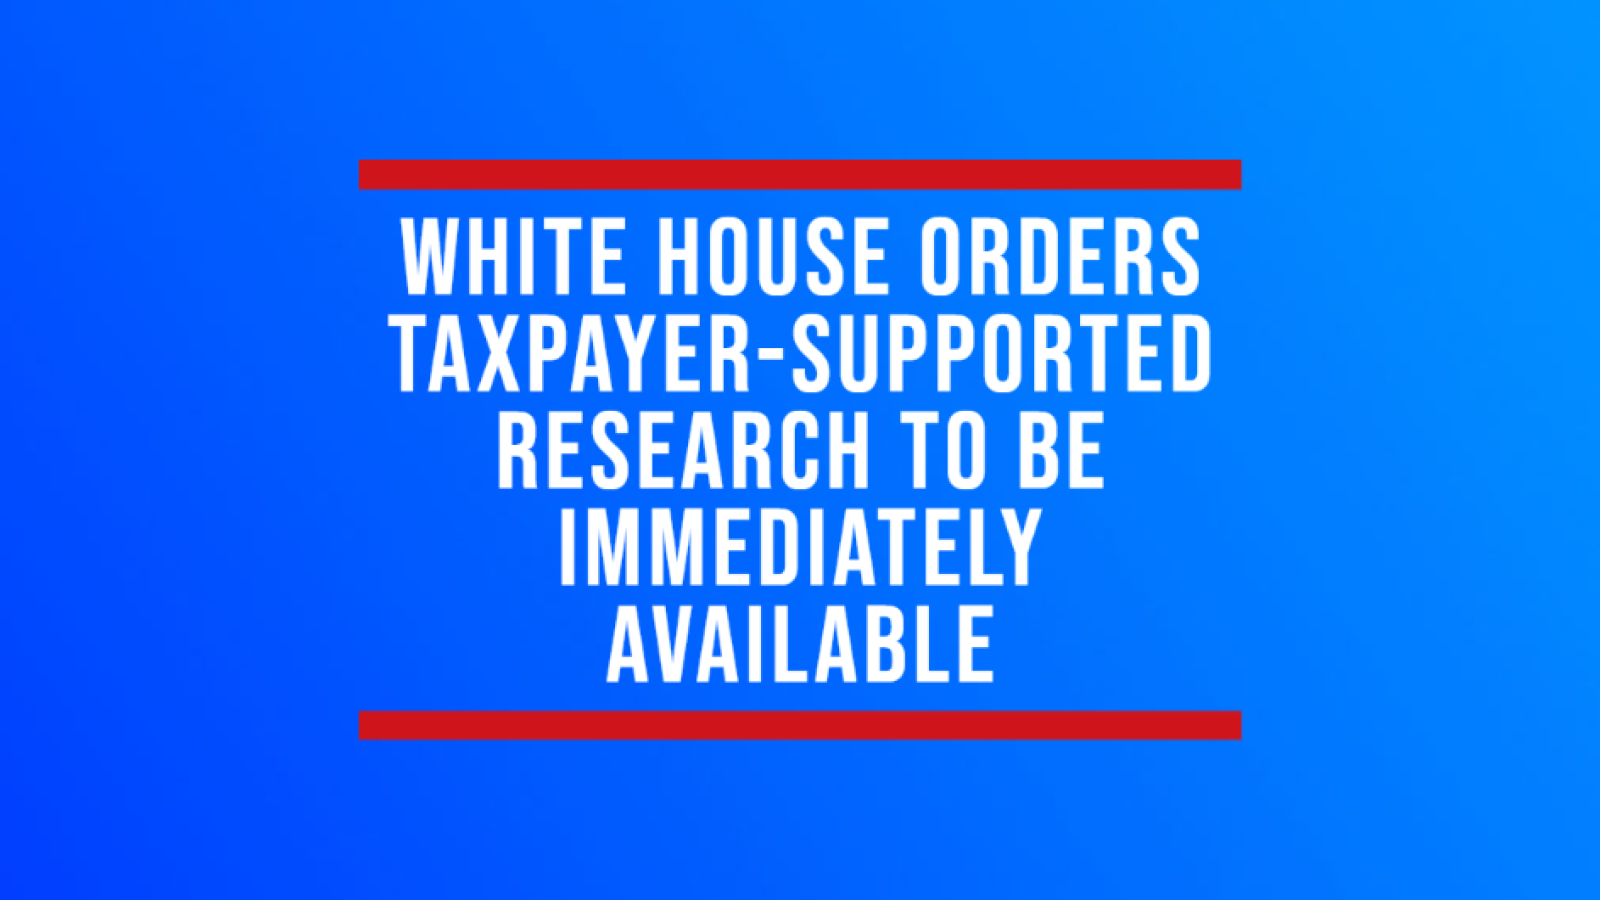 White House orders taxpayer-supported research to be immediately available